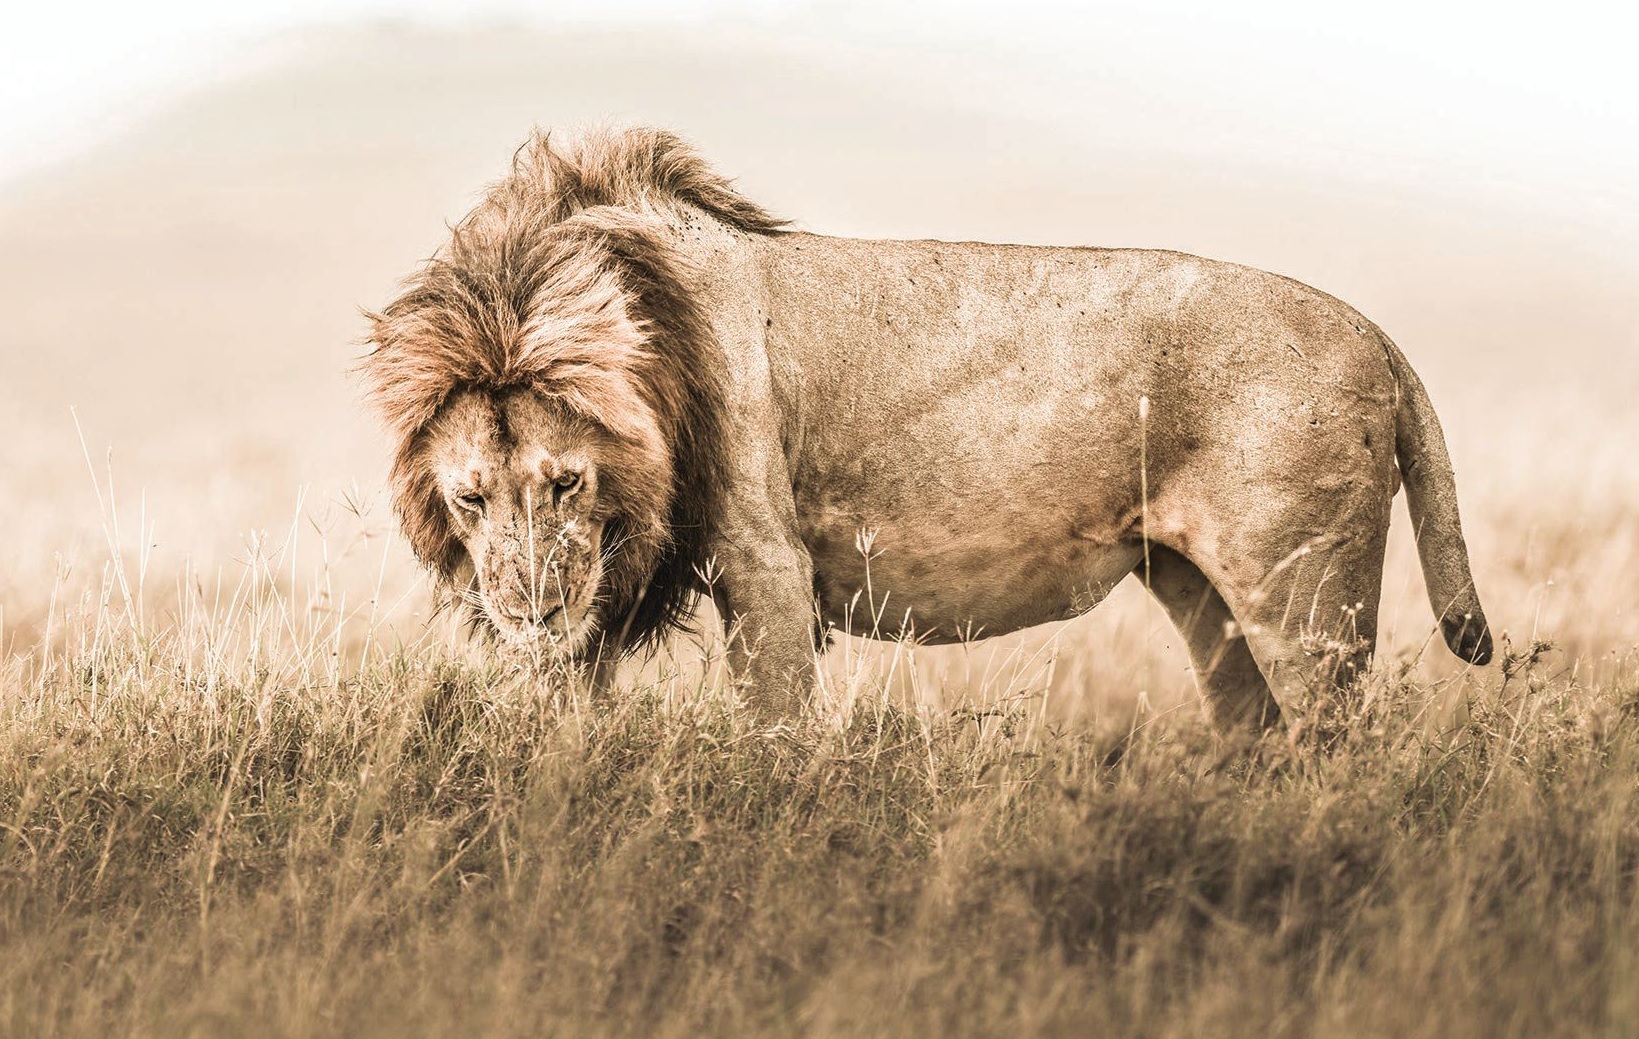 A single lion. Photographed by Guadalupe Laiz